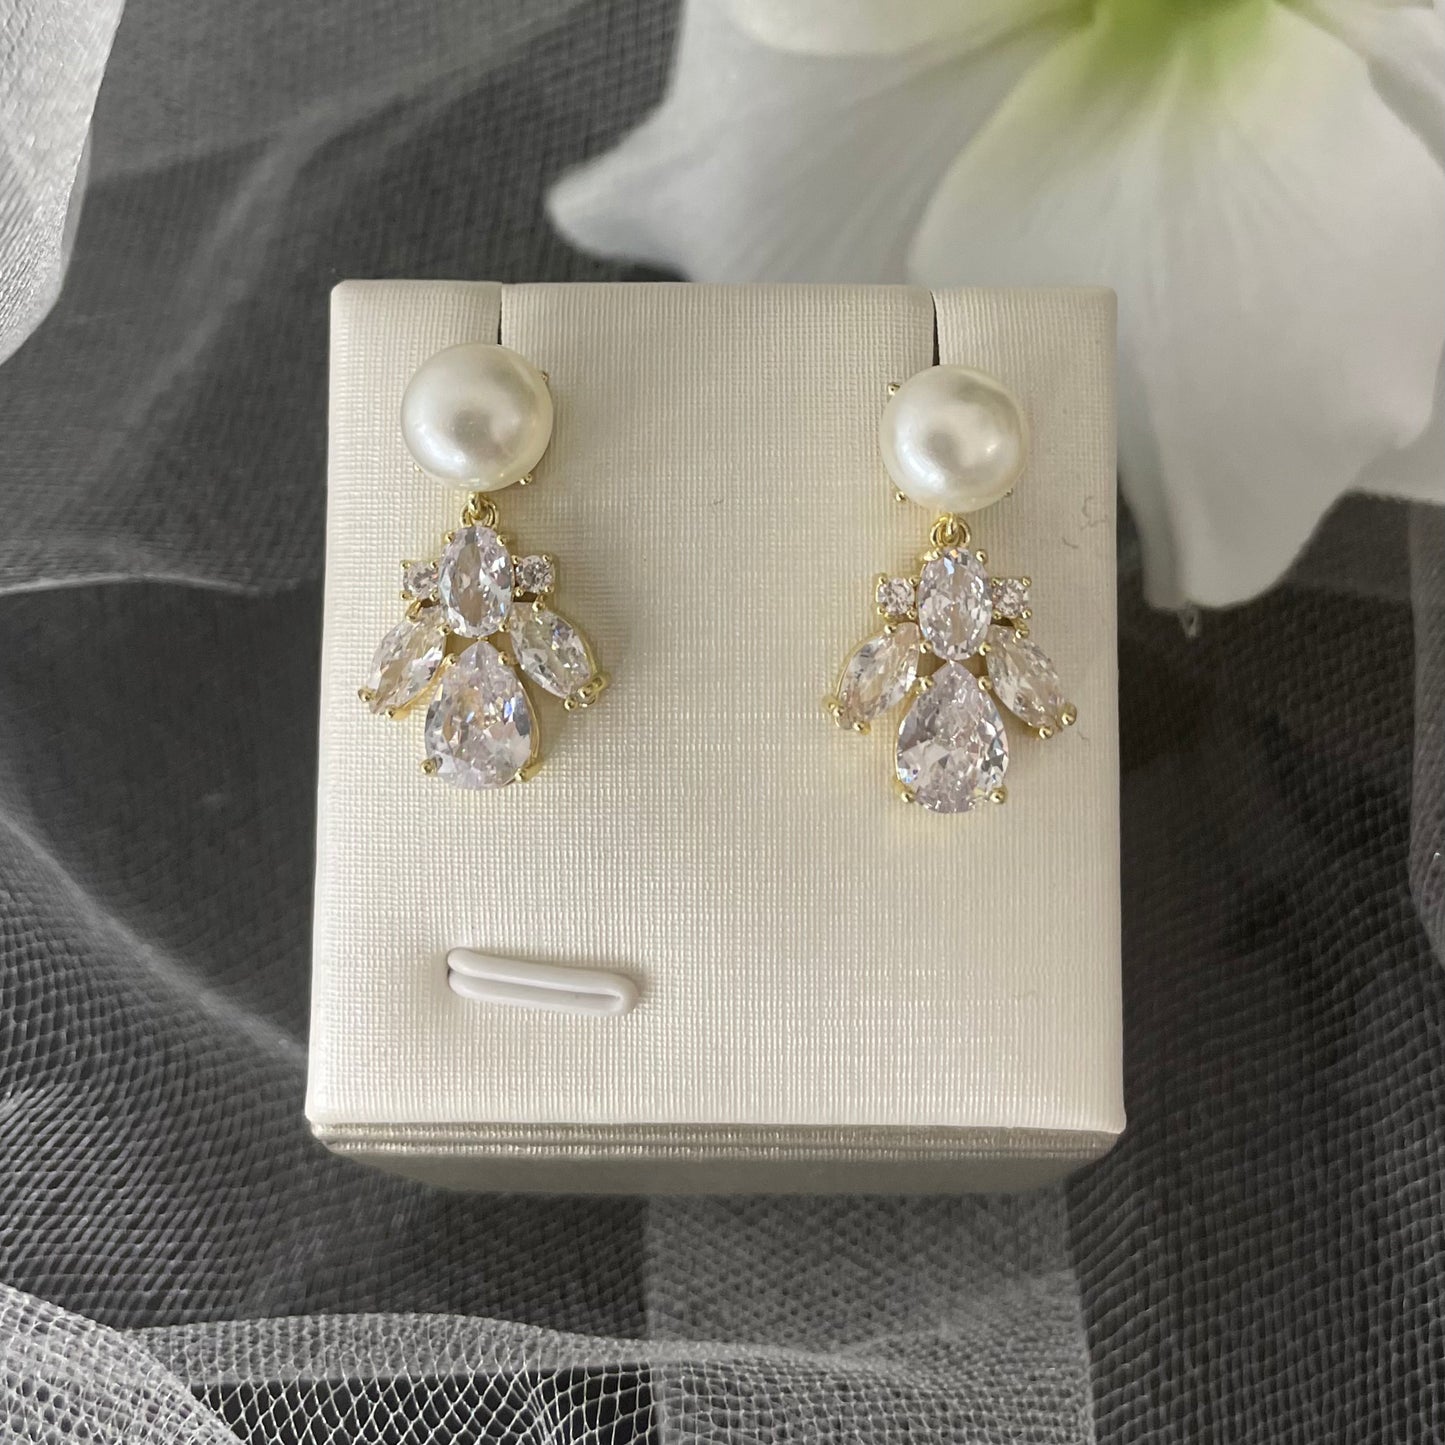 Elixir Bridal Stud Earrings with Gold Plated CZ and Pearls - Divine Bridal